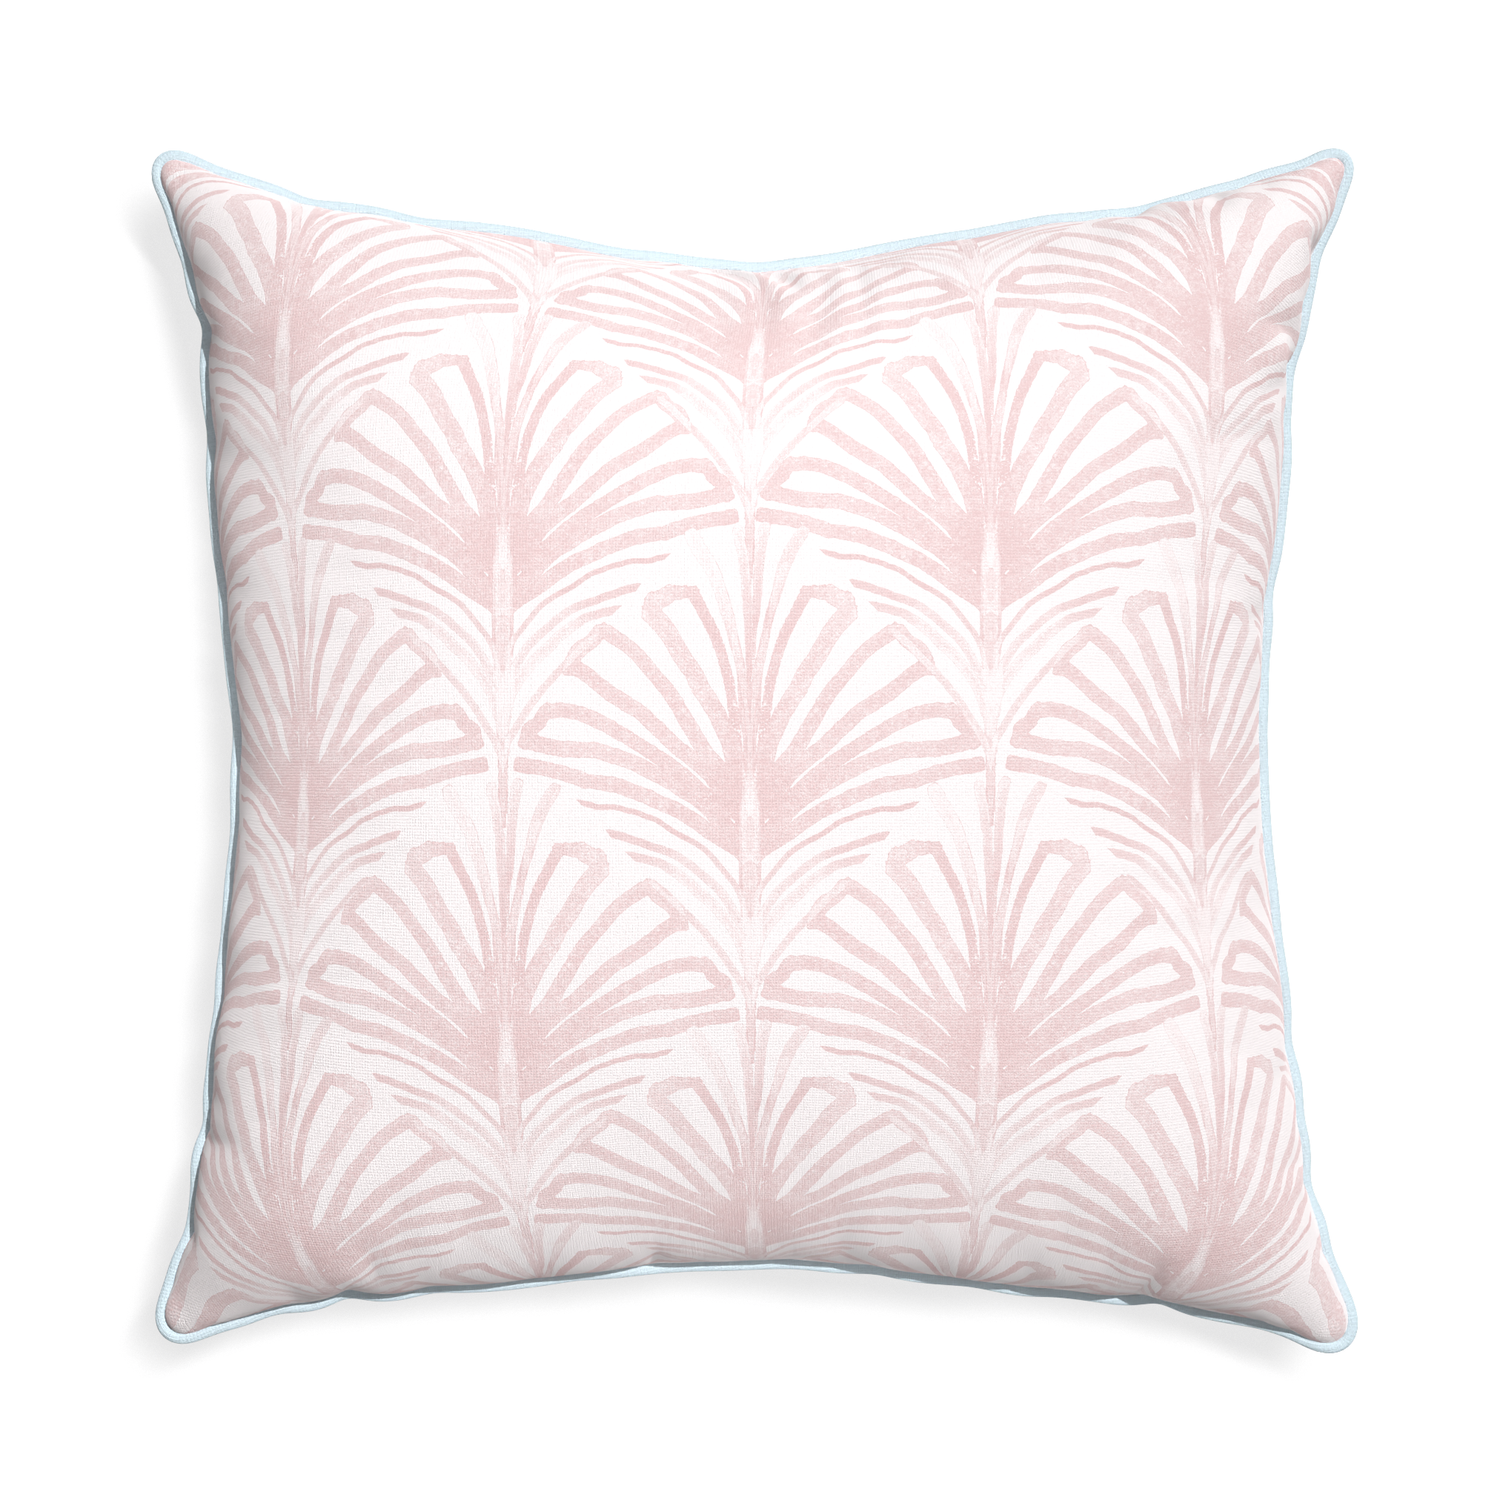 Euro-sham suzy rose custom pillow with powder piping on white background